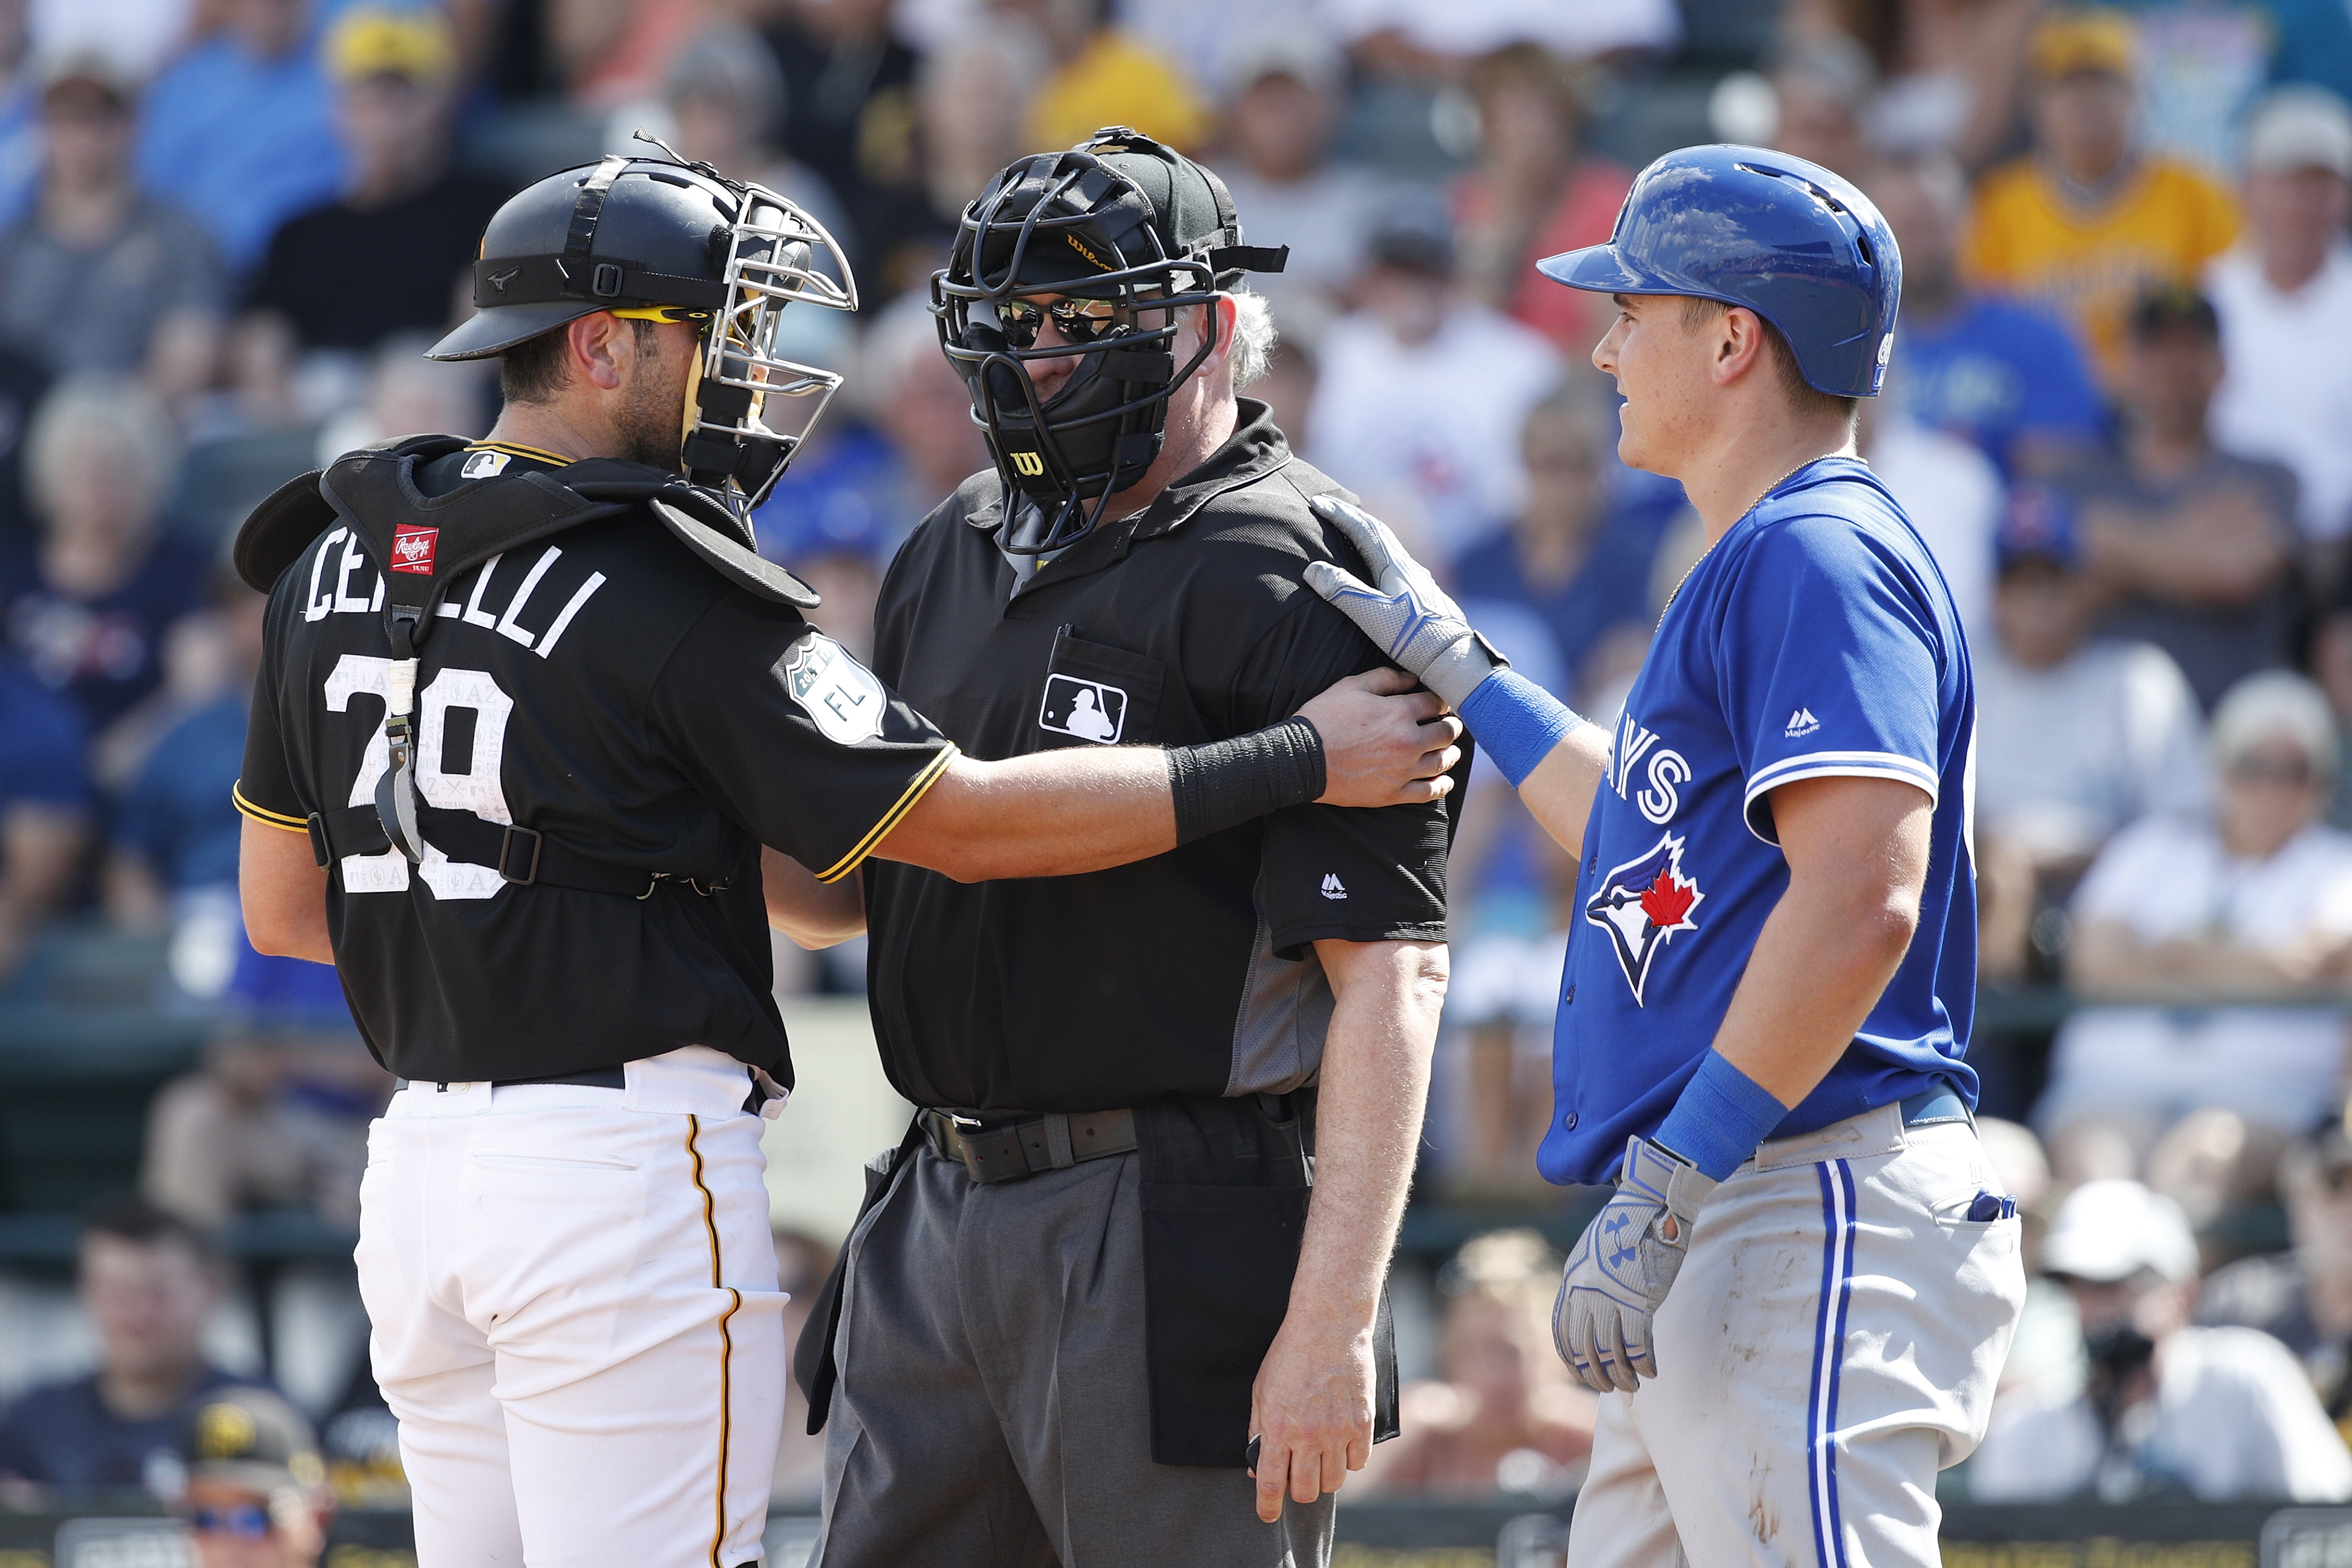 Toronto Blue Jays: McGuire, Jansen in the catching plans for 2018?